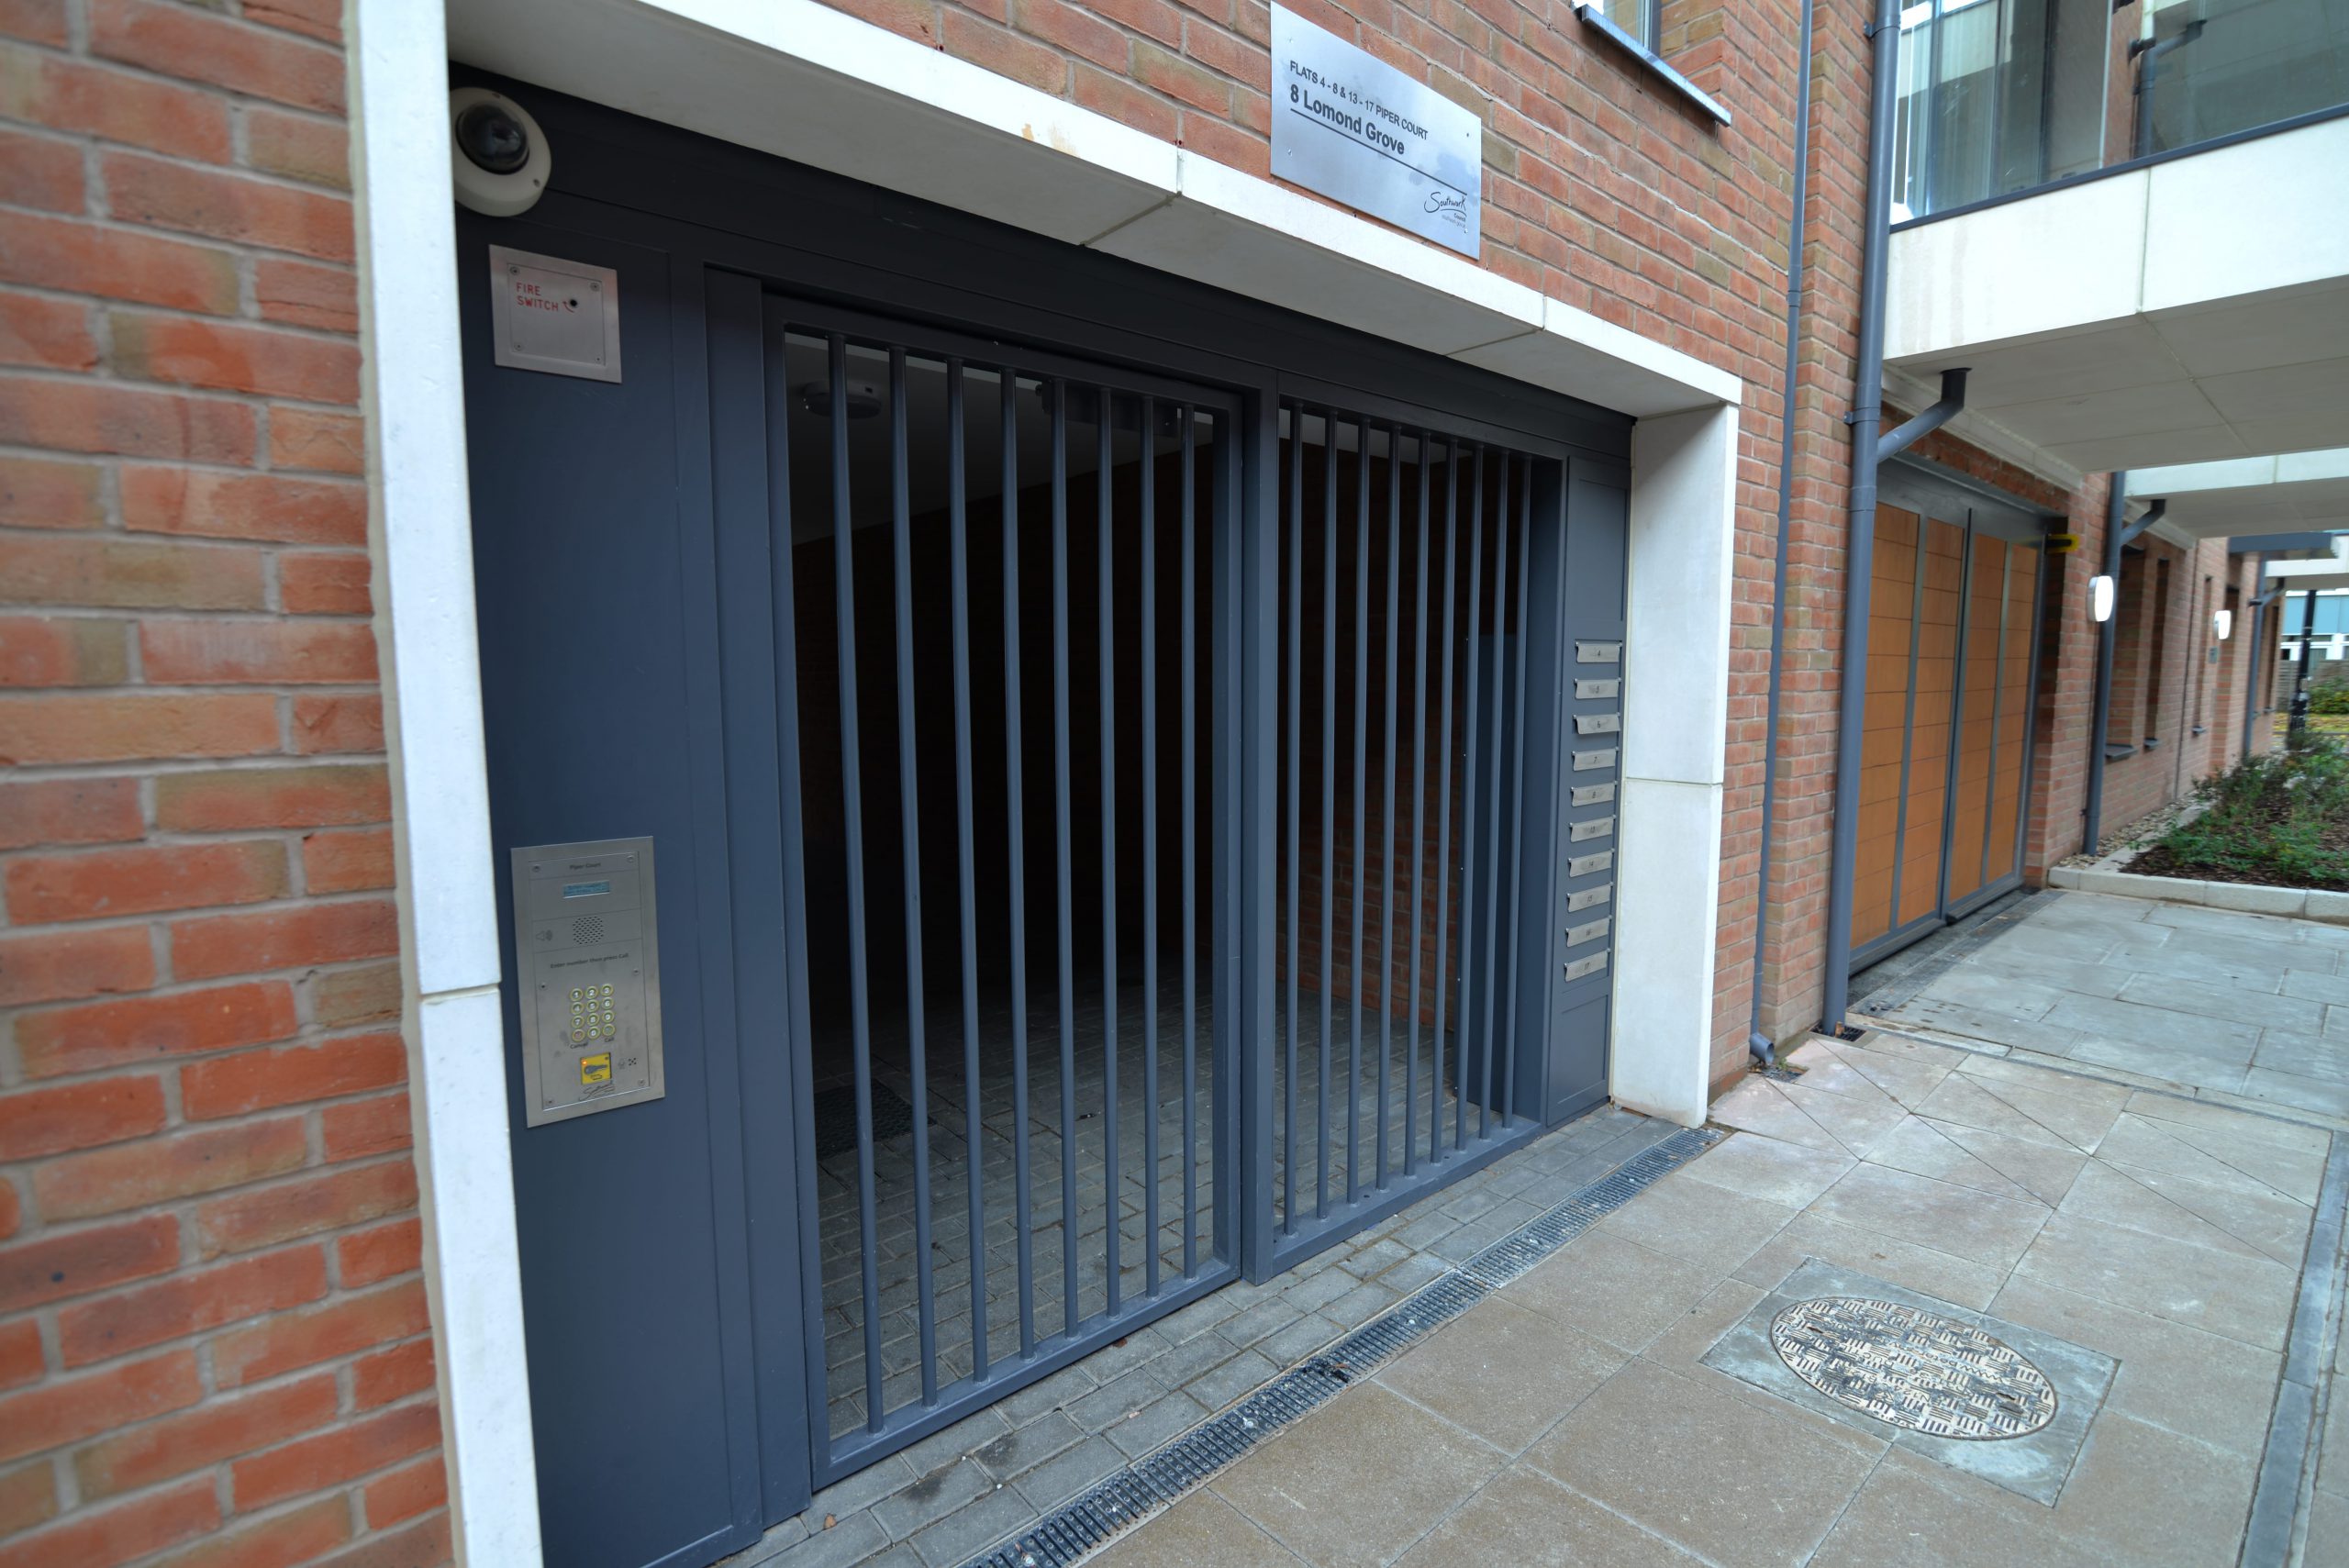 INDUSTRIAL STEEL GATES AND MAIL BOX FABRICATED TO LPS1175 SR2 AND PAS24 STANDARD. PRODUCED AND INSTALLED BY PREMIER SECURITY CONSULTANTS LTD.